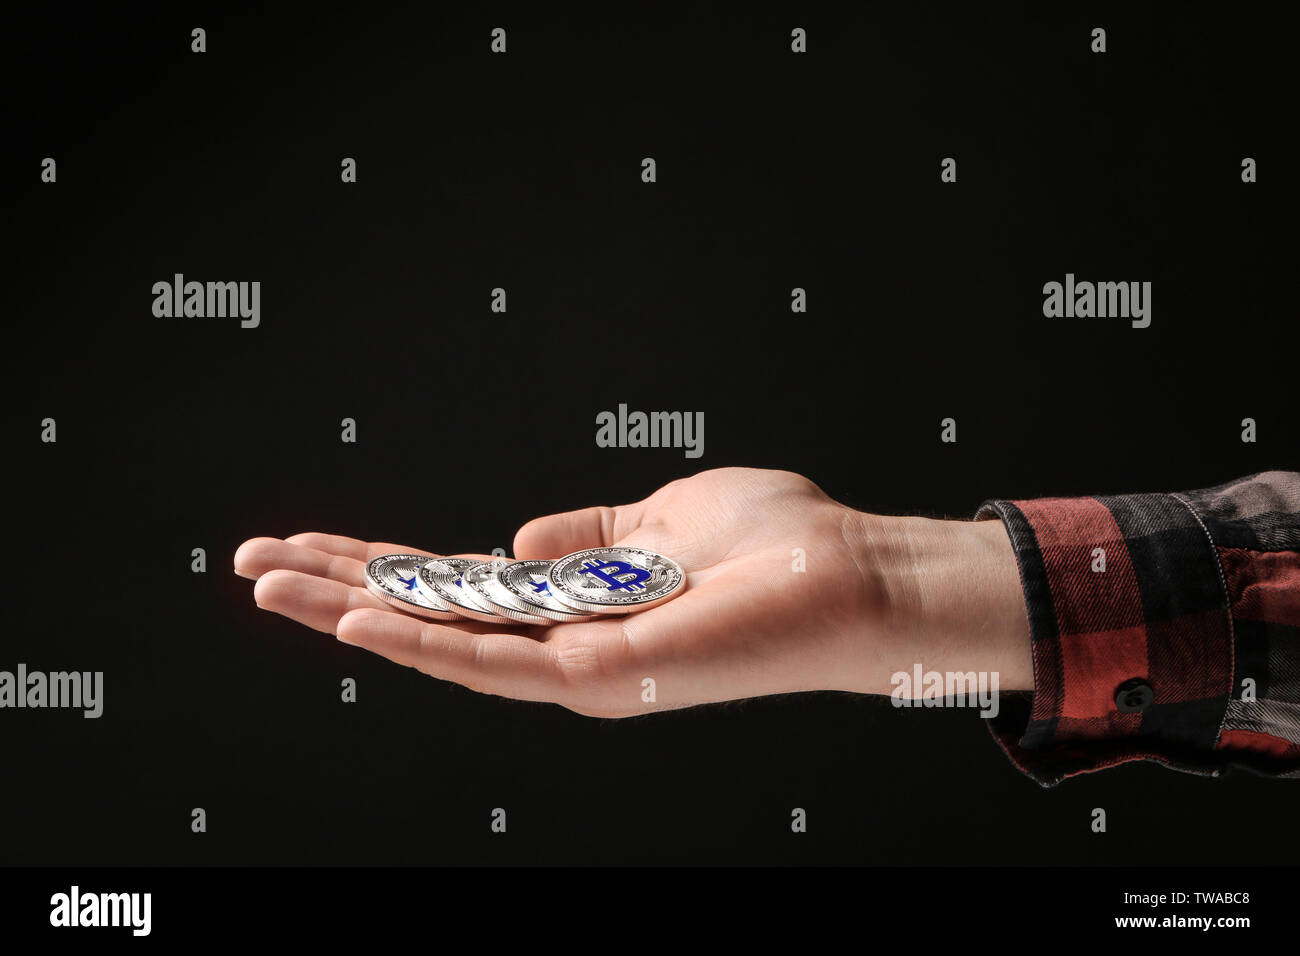 Man holding silver bitcoin on black background Stock Photo